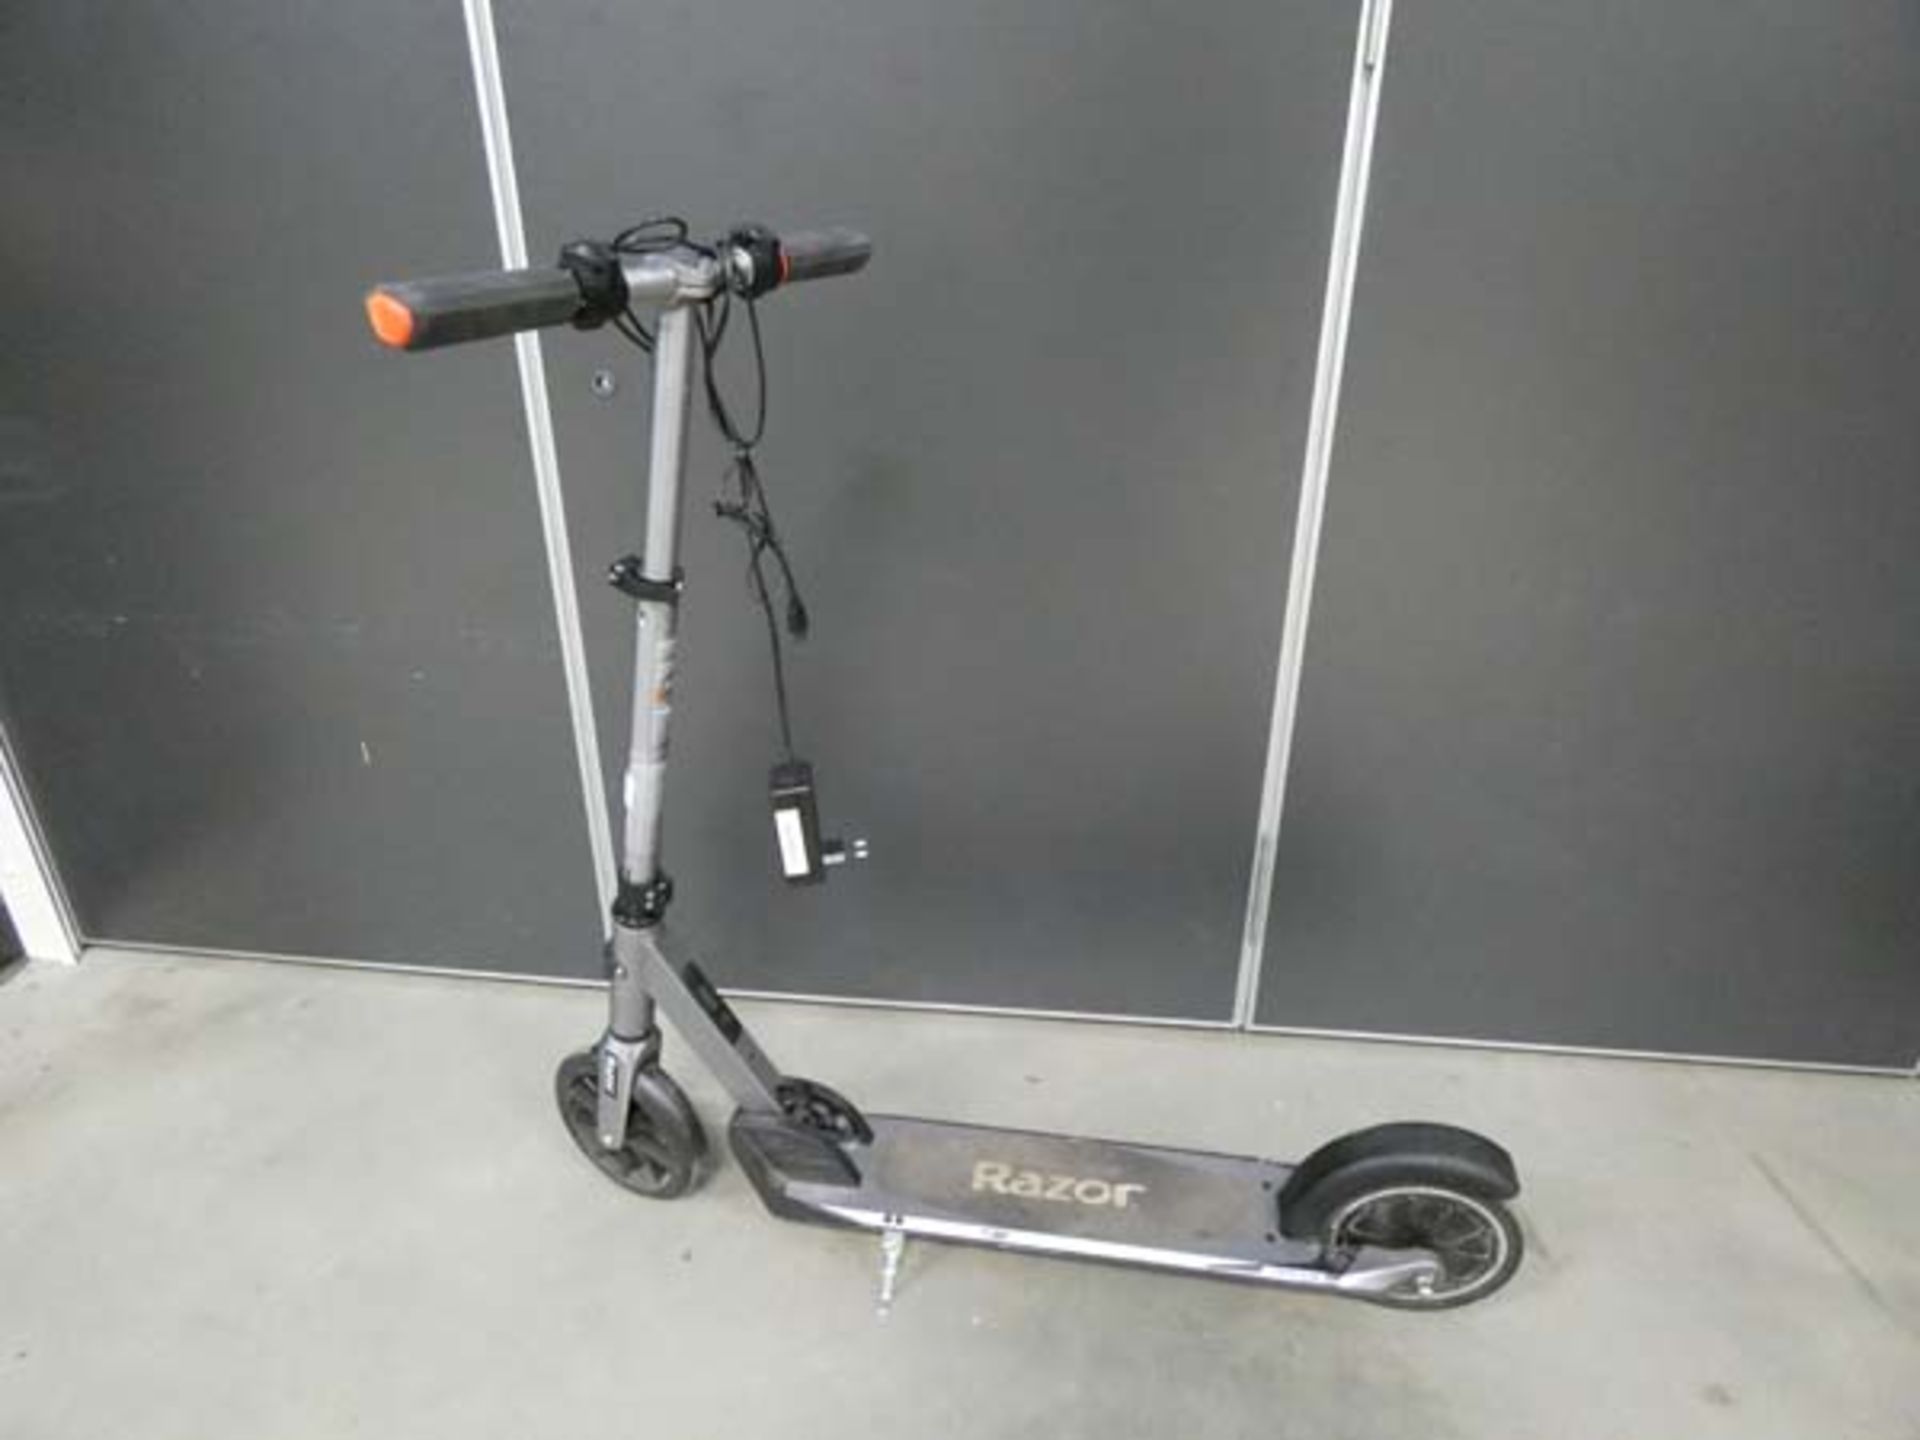 Razor electric scooter with charger - Image 3 of 3